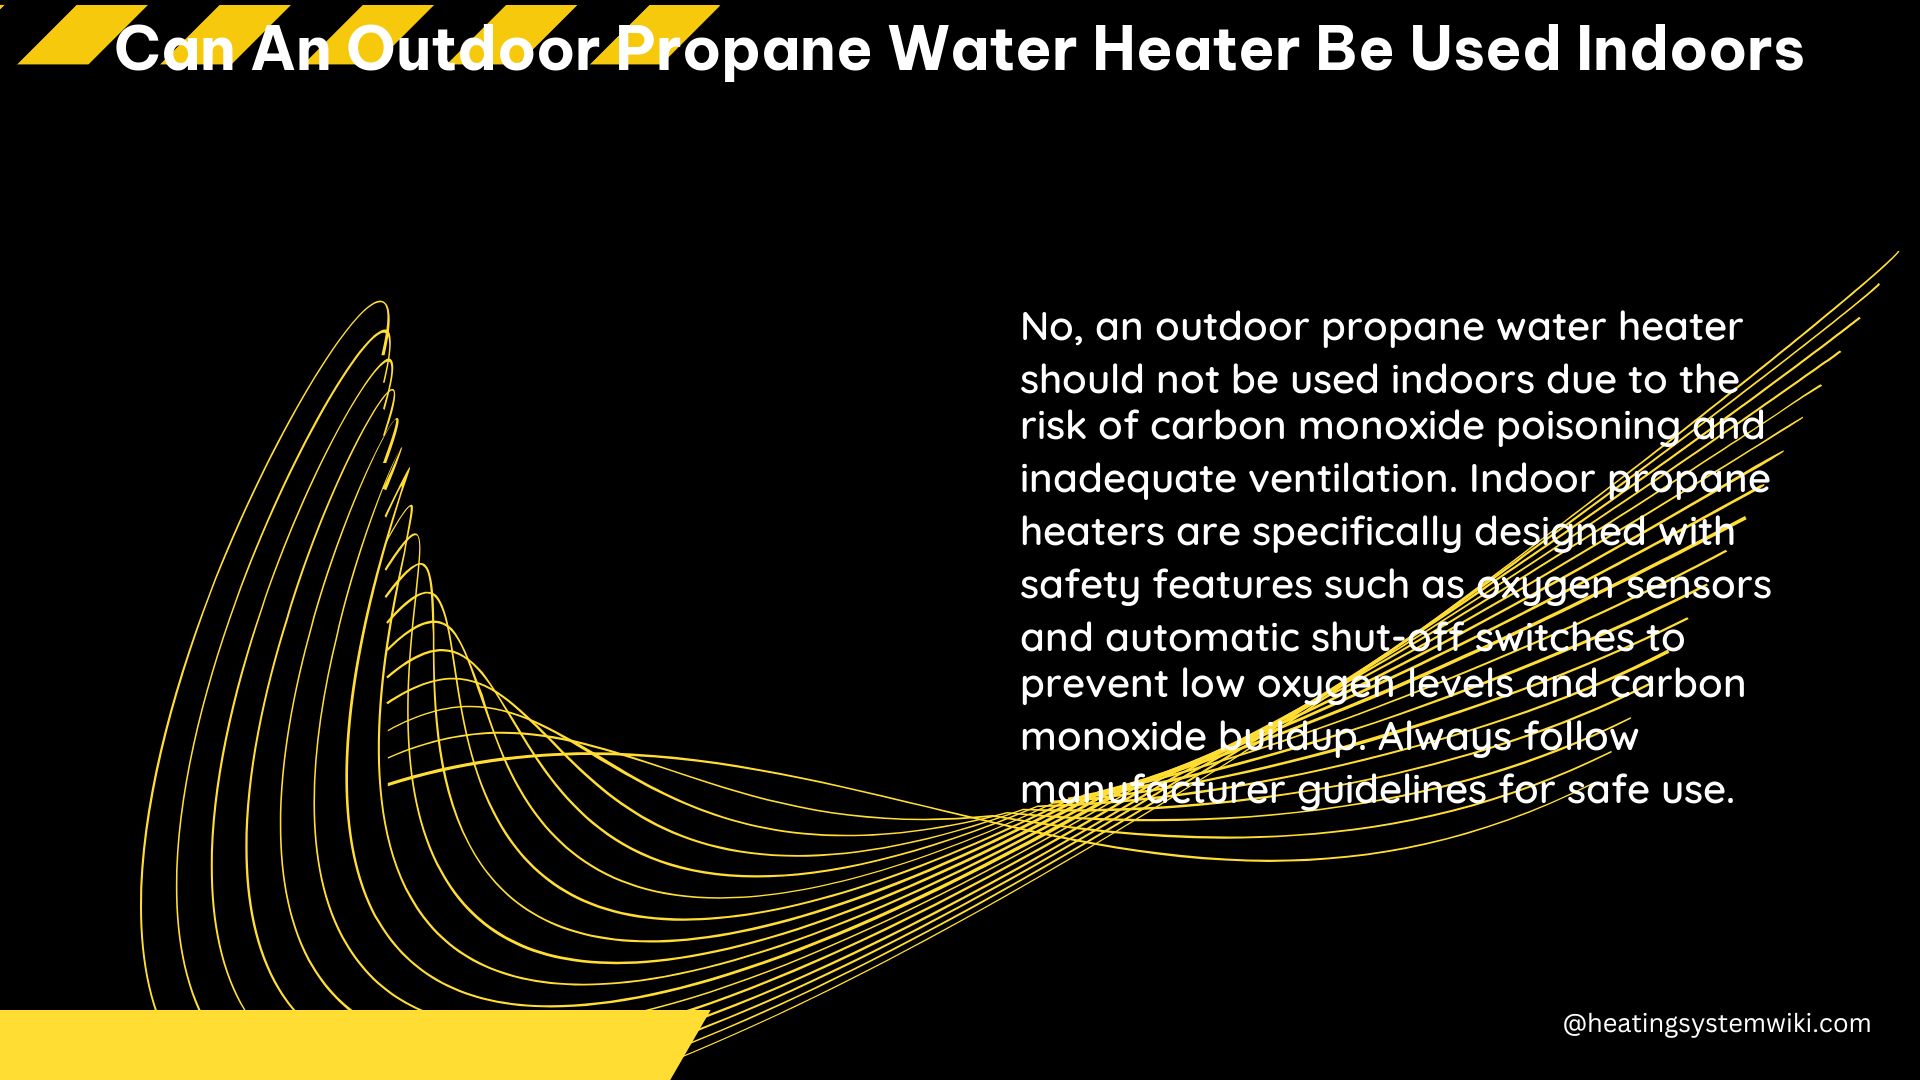 can an outdoor propane water heater be used indoors